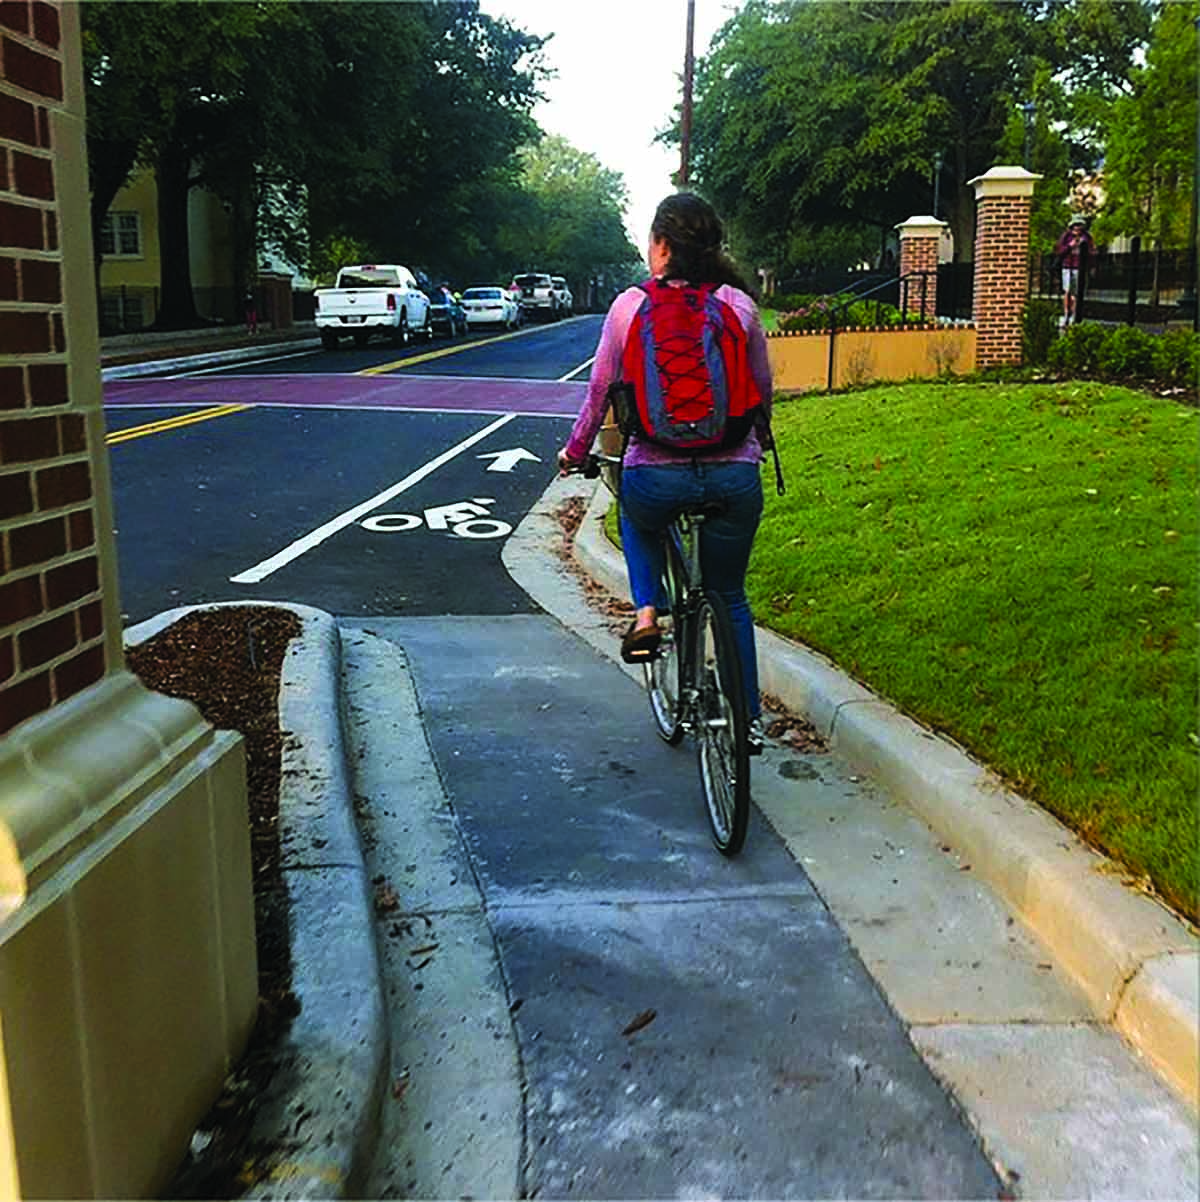 A Greene Street bicycle lane travels around the outside of a gate post on the University of South Carolina’s campus in Columbia